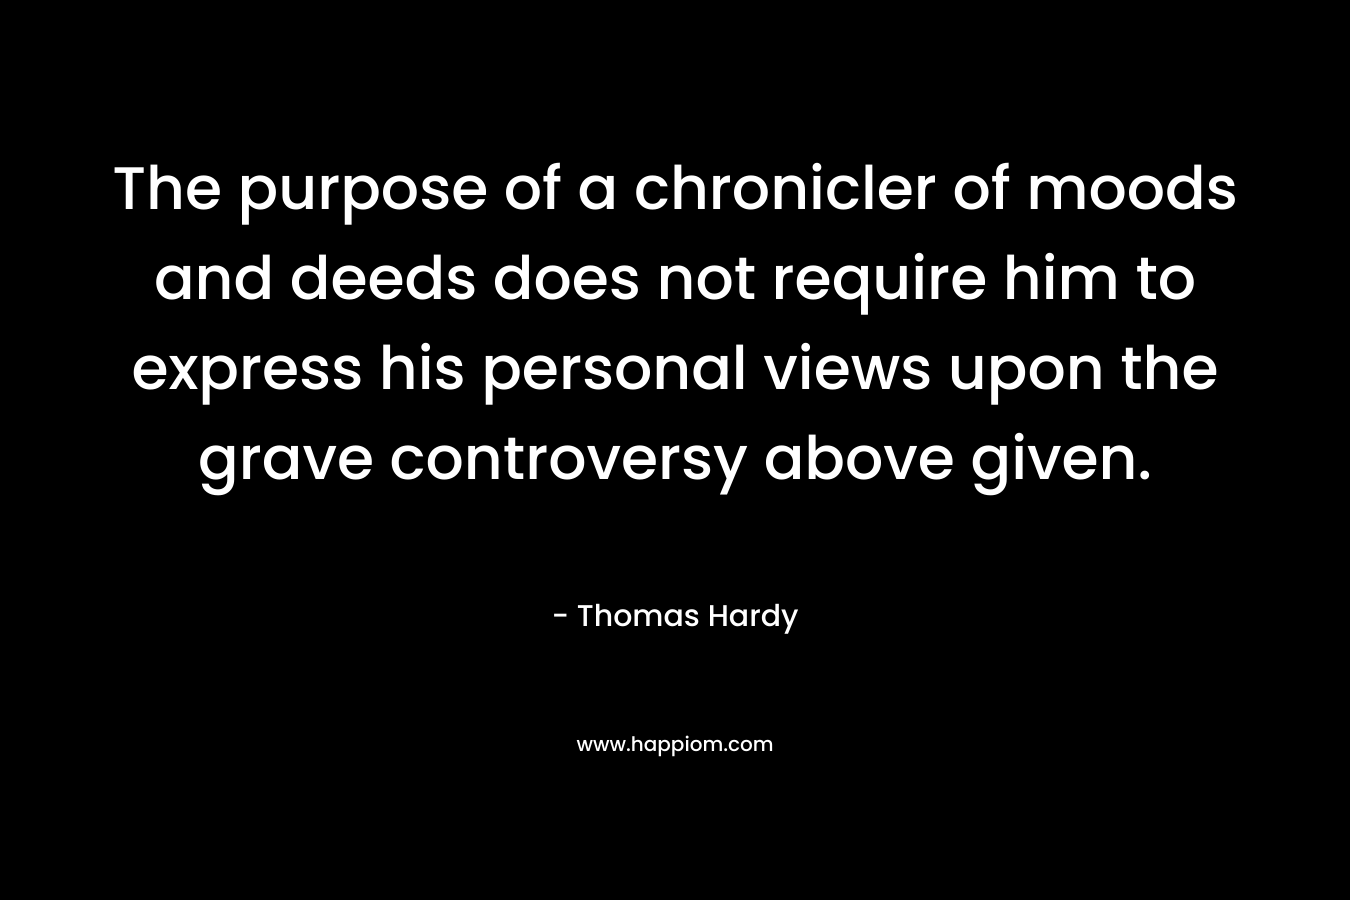 The purpose of a chronicler of moods and deeds does not require him to express his personal views upon the grave controversy above given.